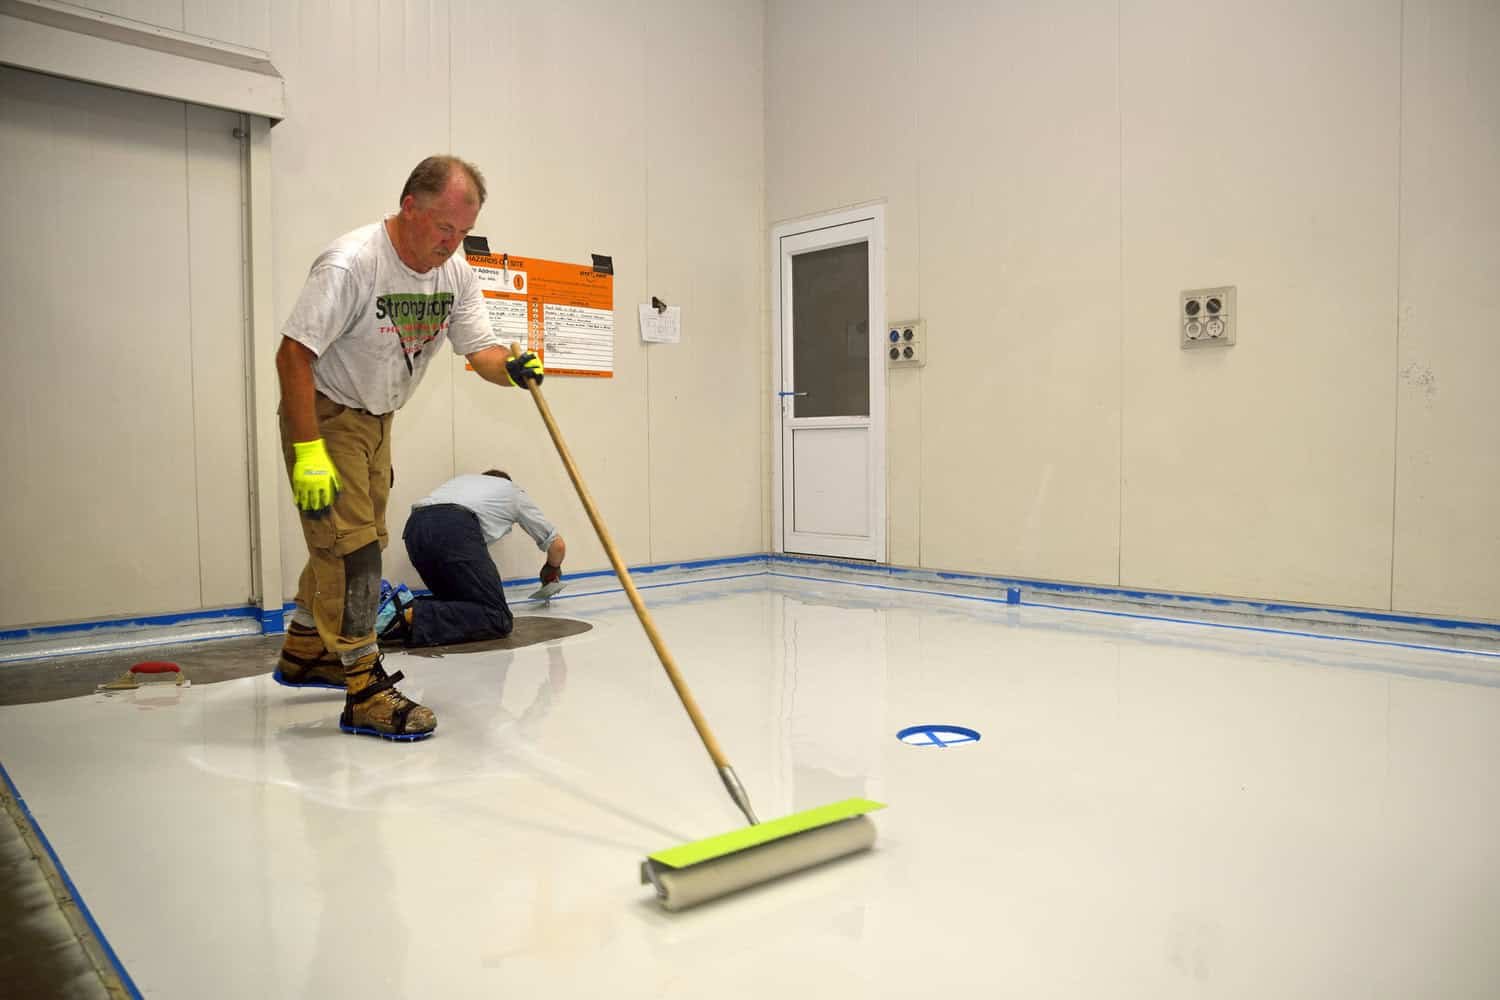 Two workers applying a white epoxy coating to a floor, one using a roller and the other kneeling to ensure an even application.